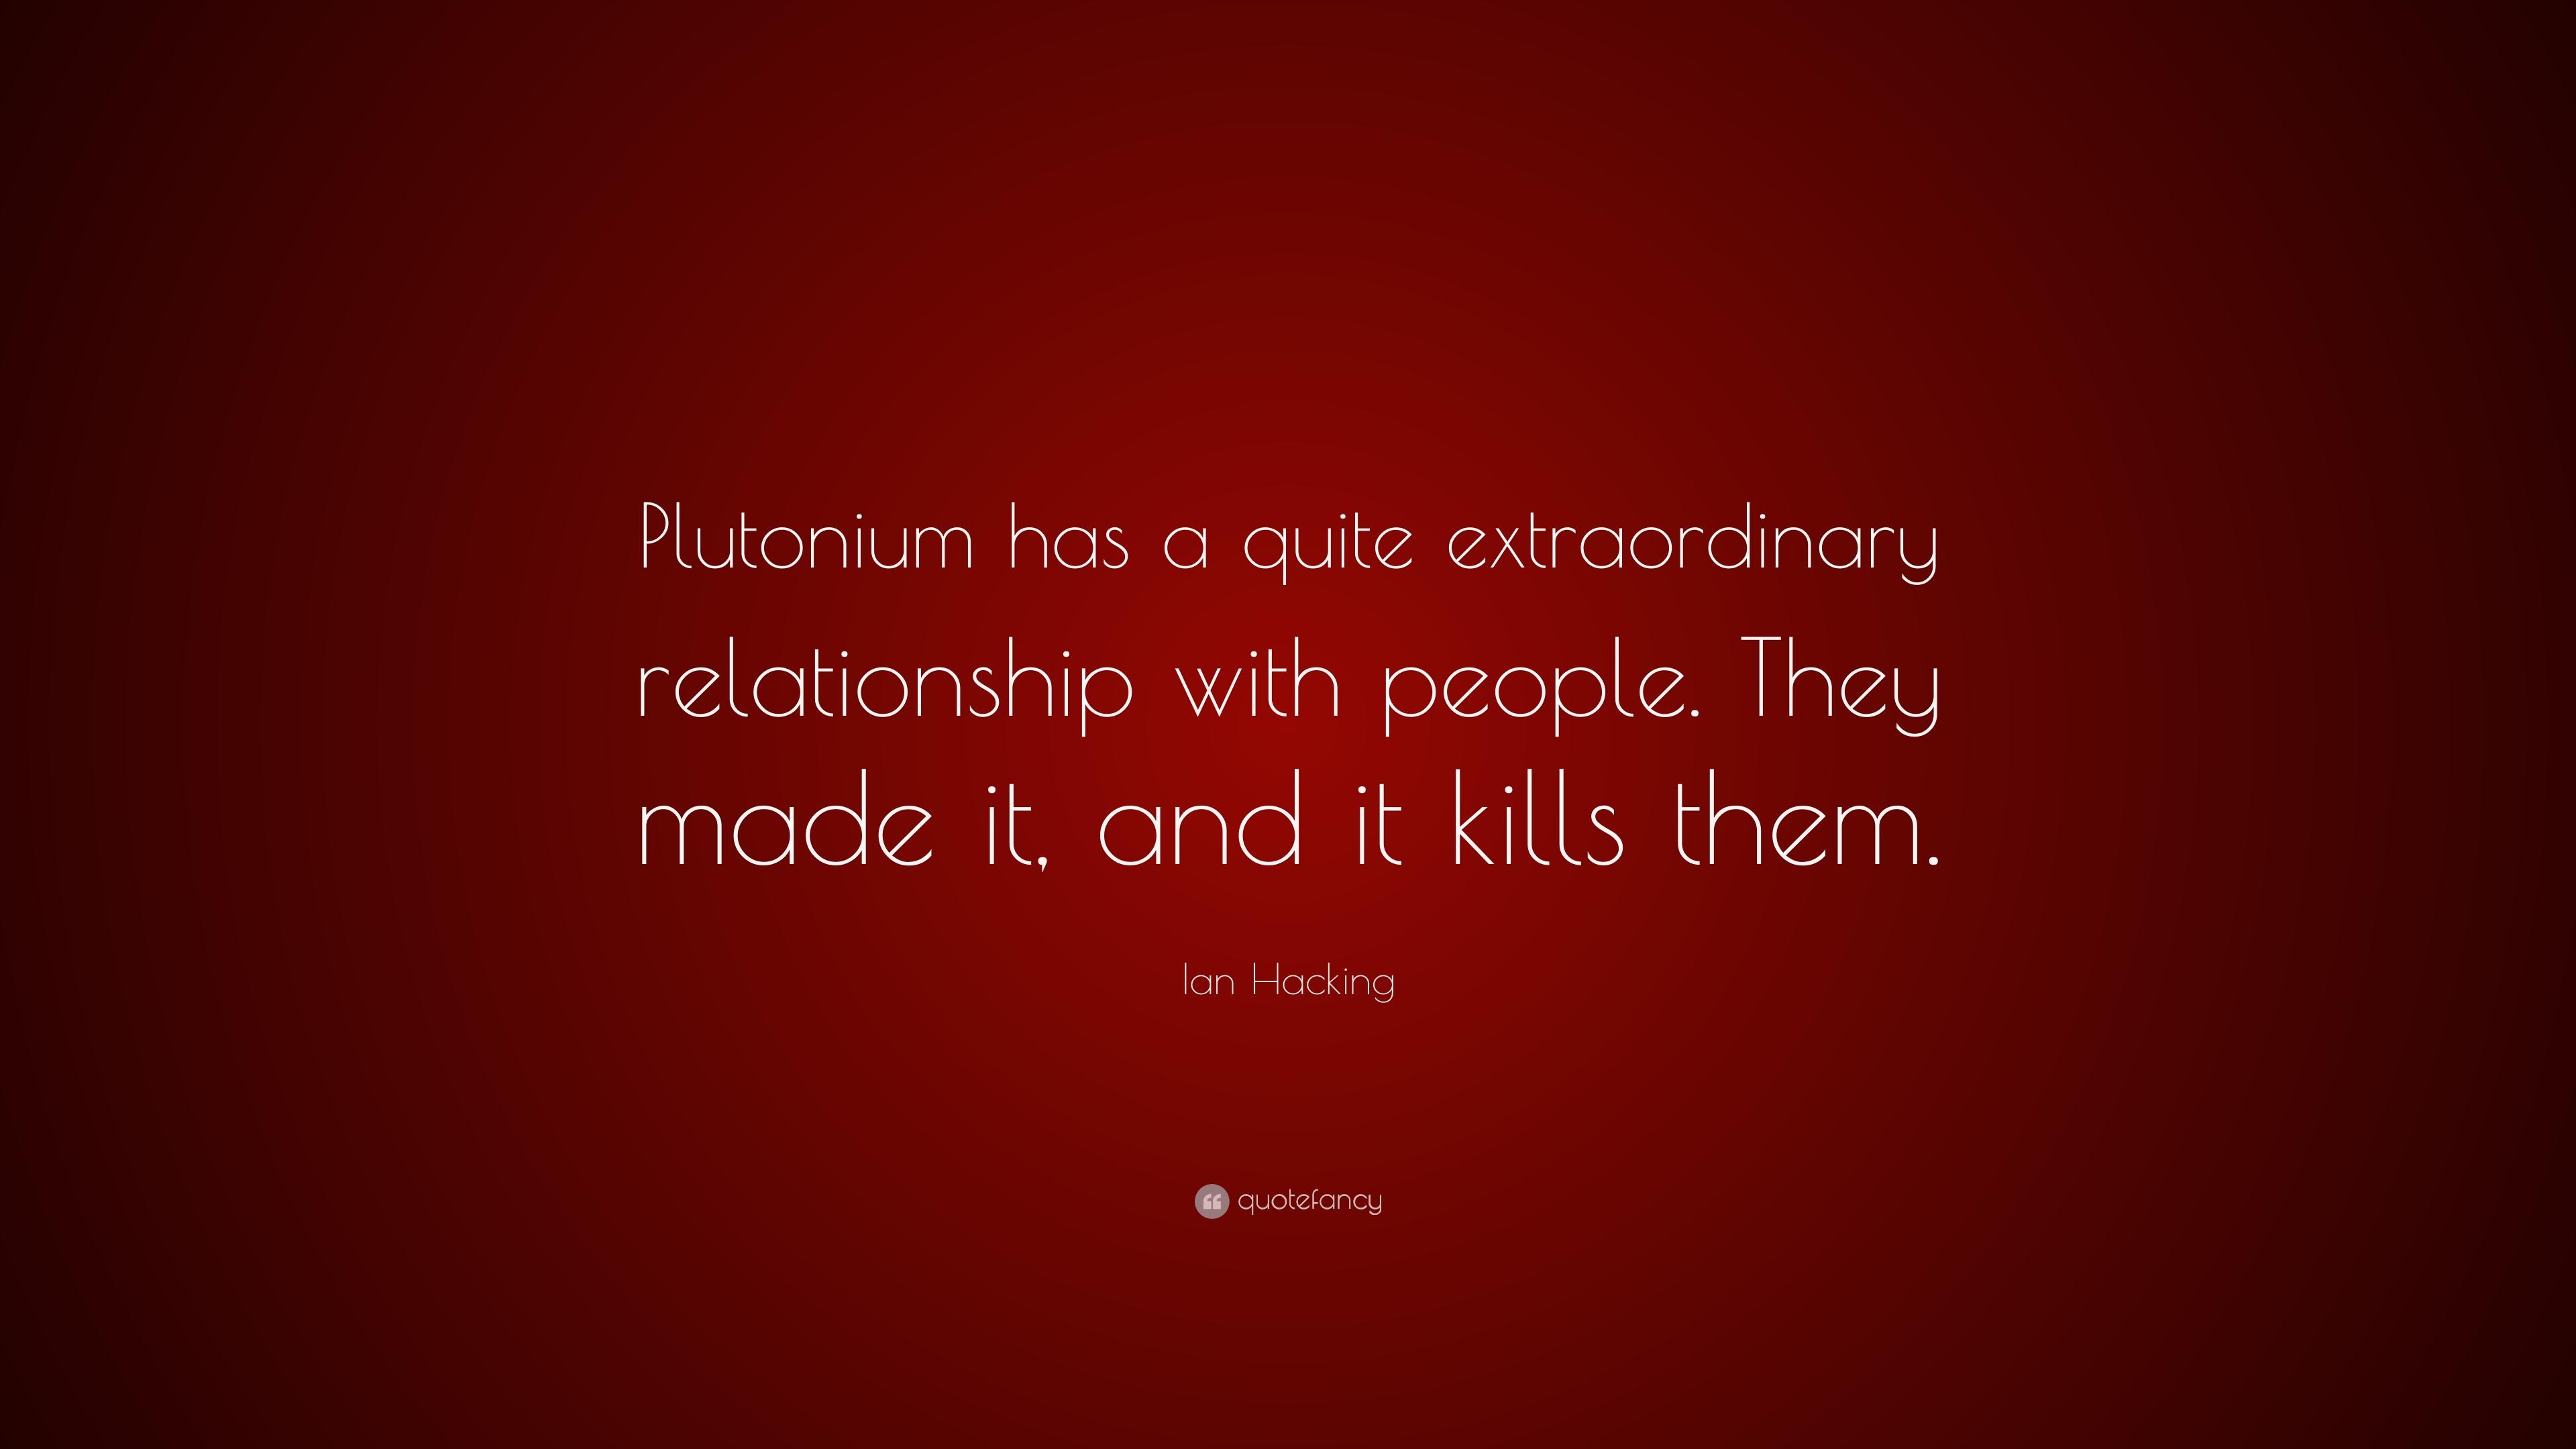 Ian Hacking Quote: “Plutonium has a quite extraordinary relationship with people. They made it, and it